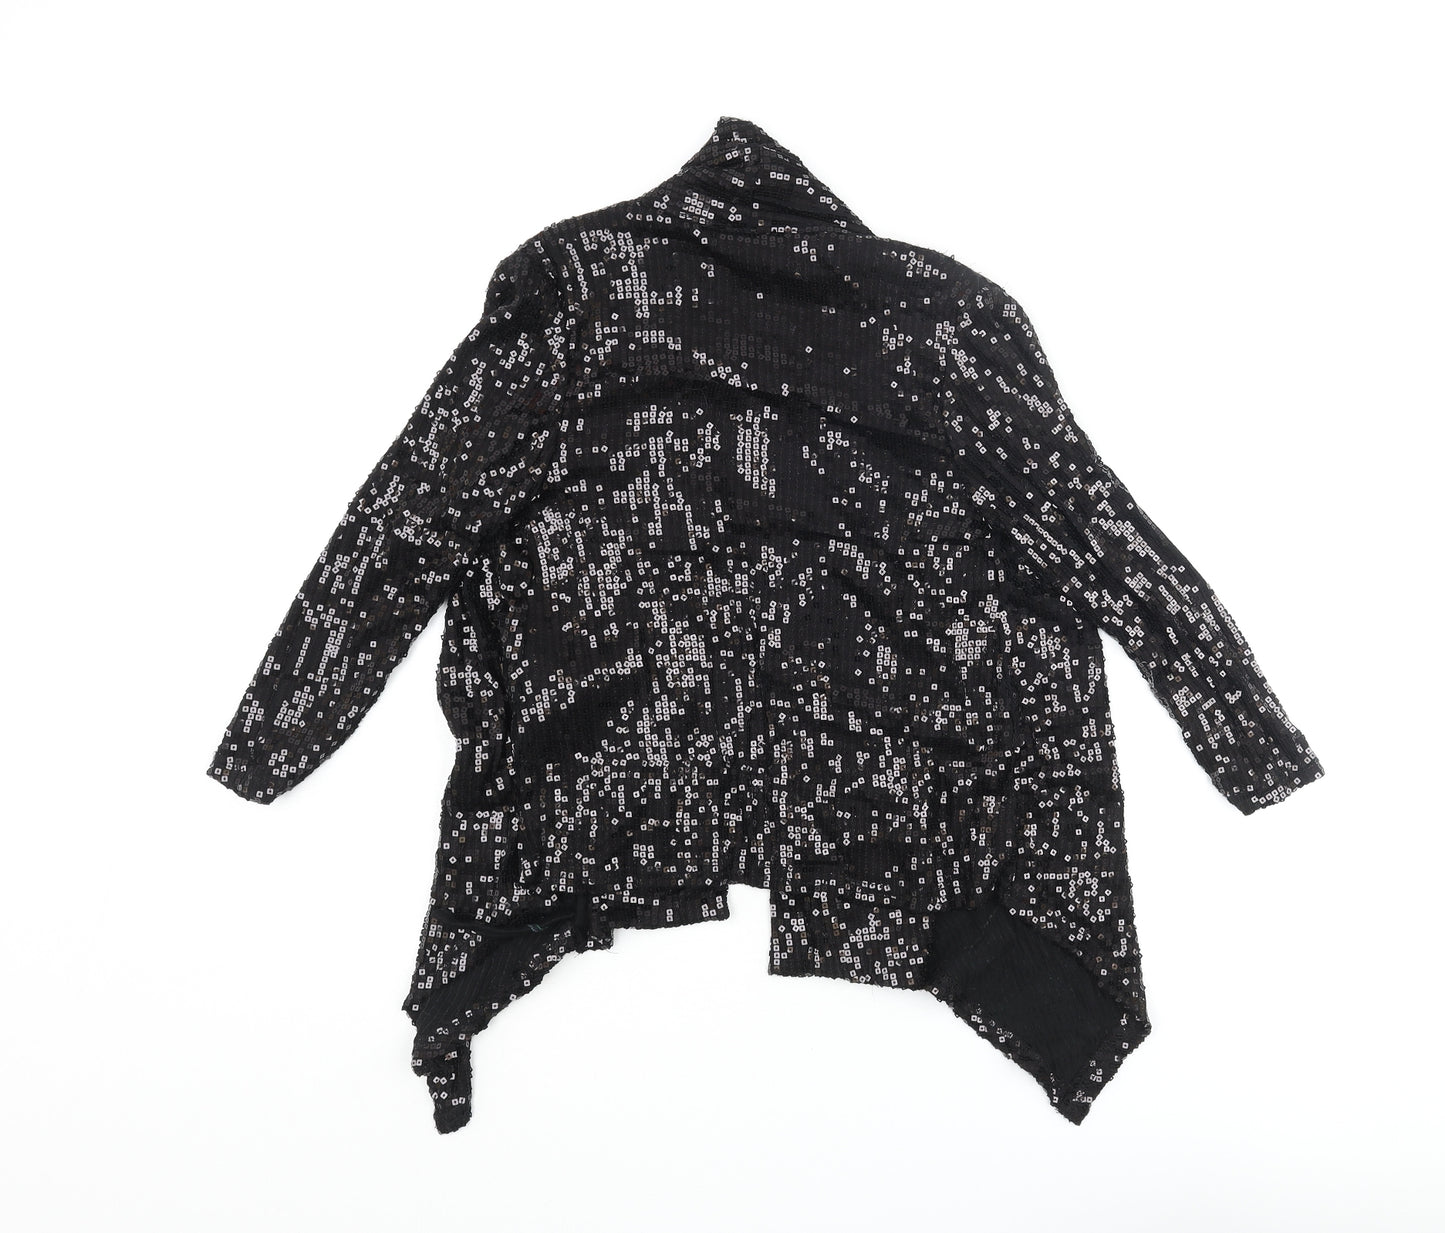 New Look Womens Black Viscose Kimono Blouse Size 10 V-Neck - Sequin Waterfall Front